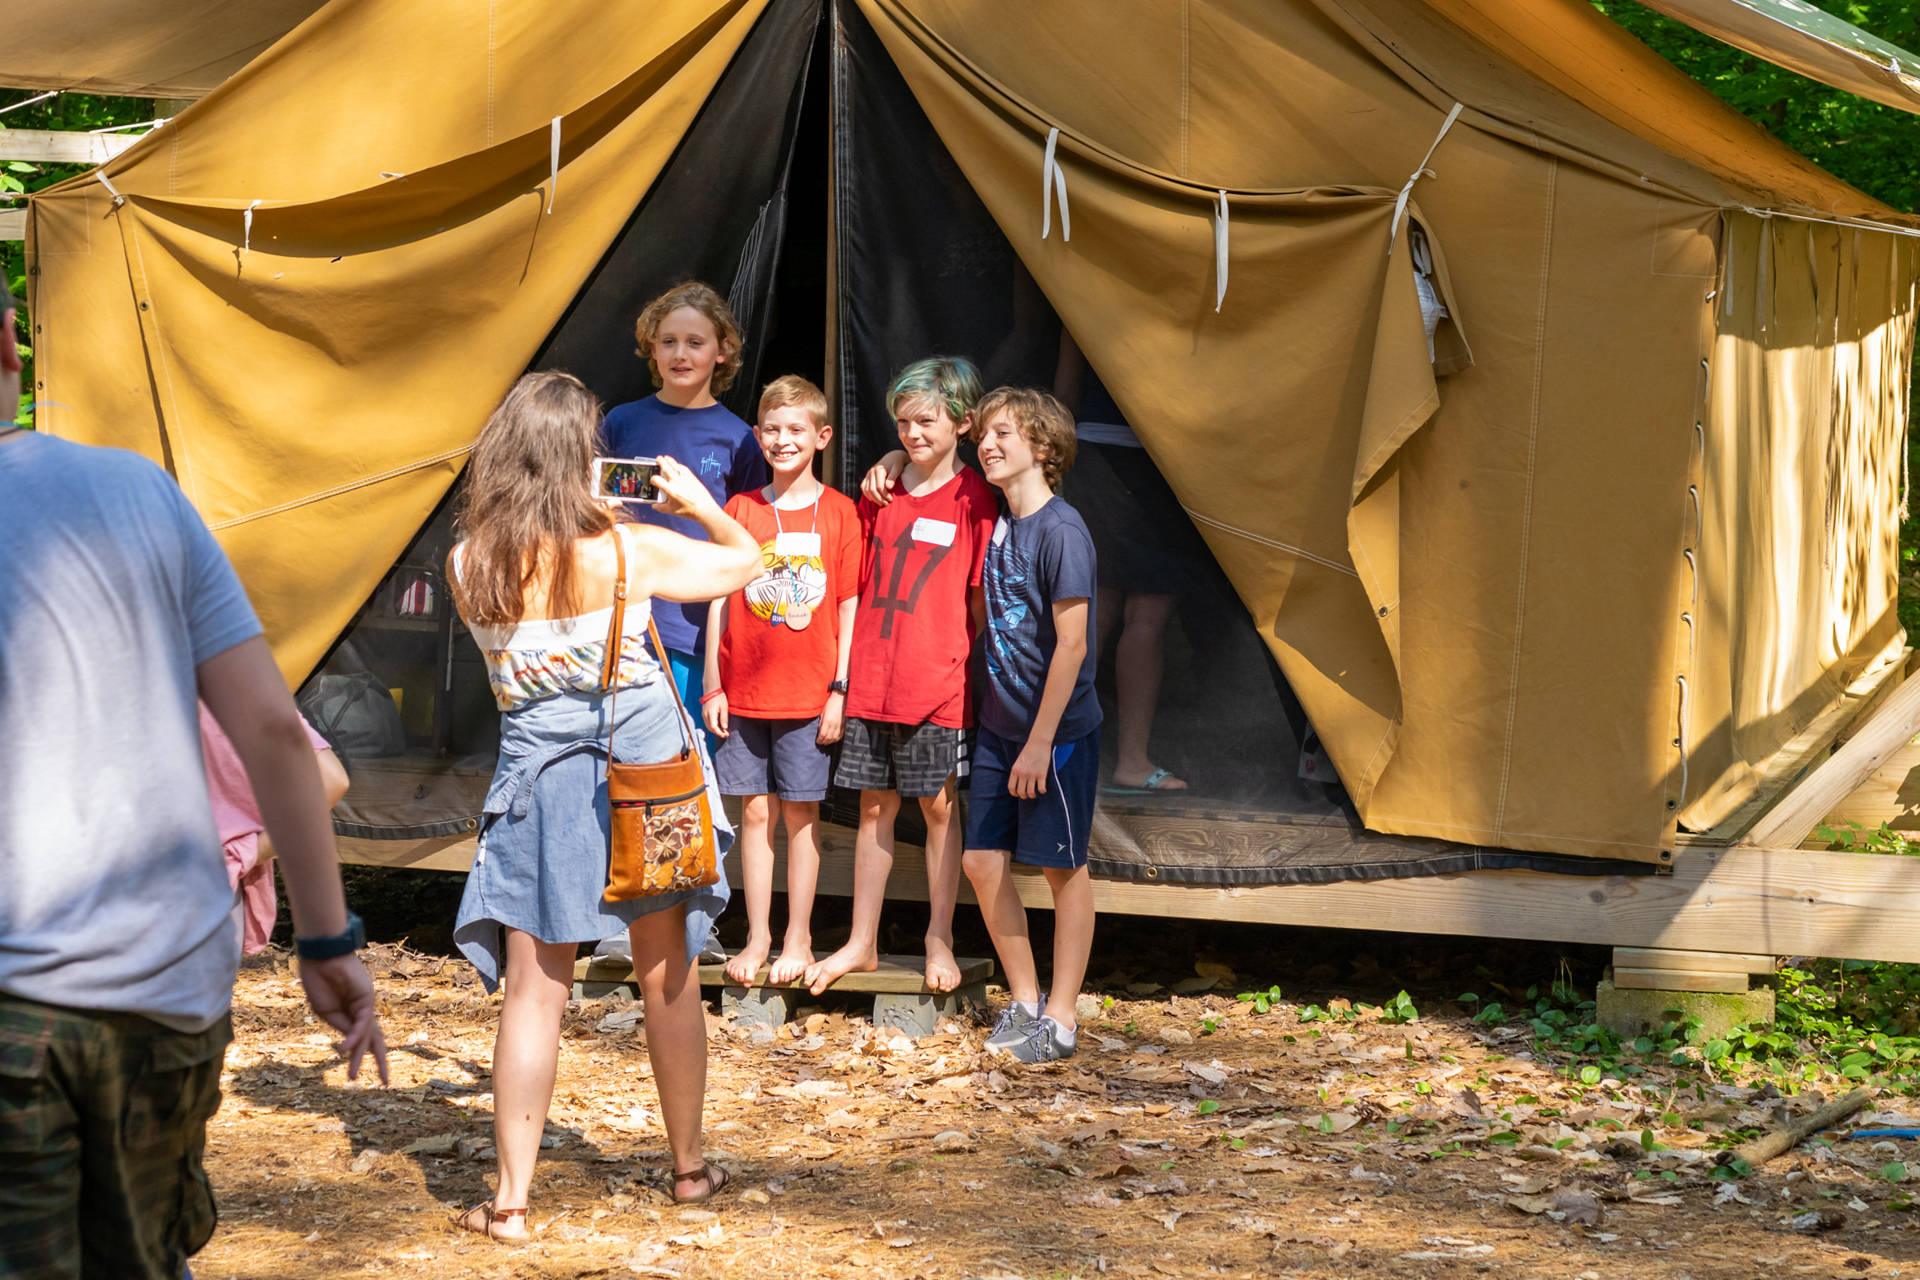 A group of four boys poses for a photo for a woman holding a smartphone in front of a yellow platform tent with the entrance flaps tied back.